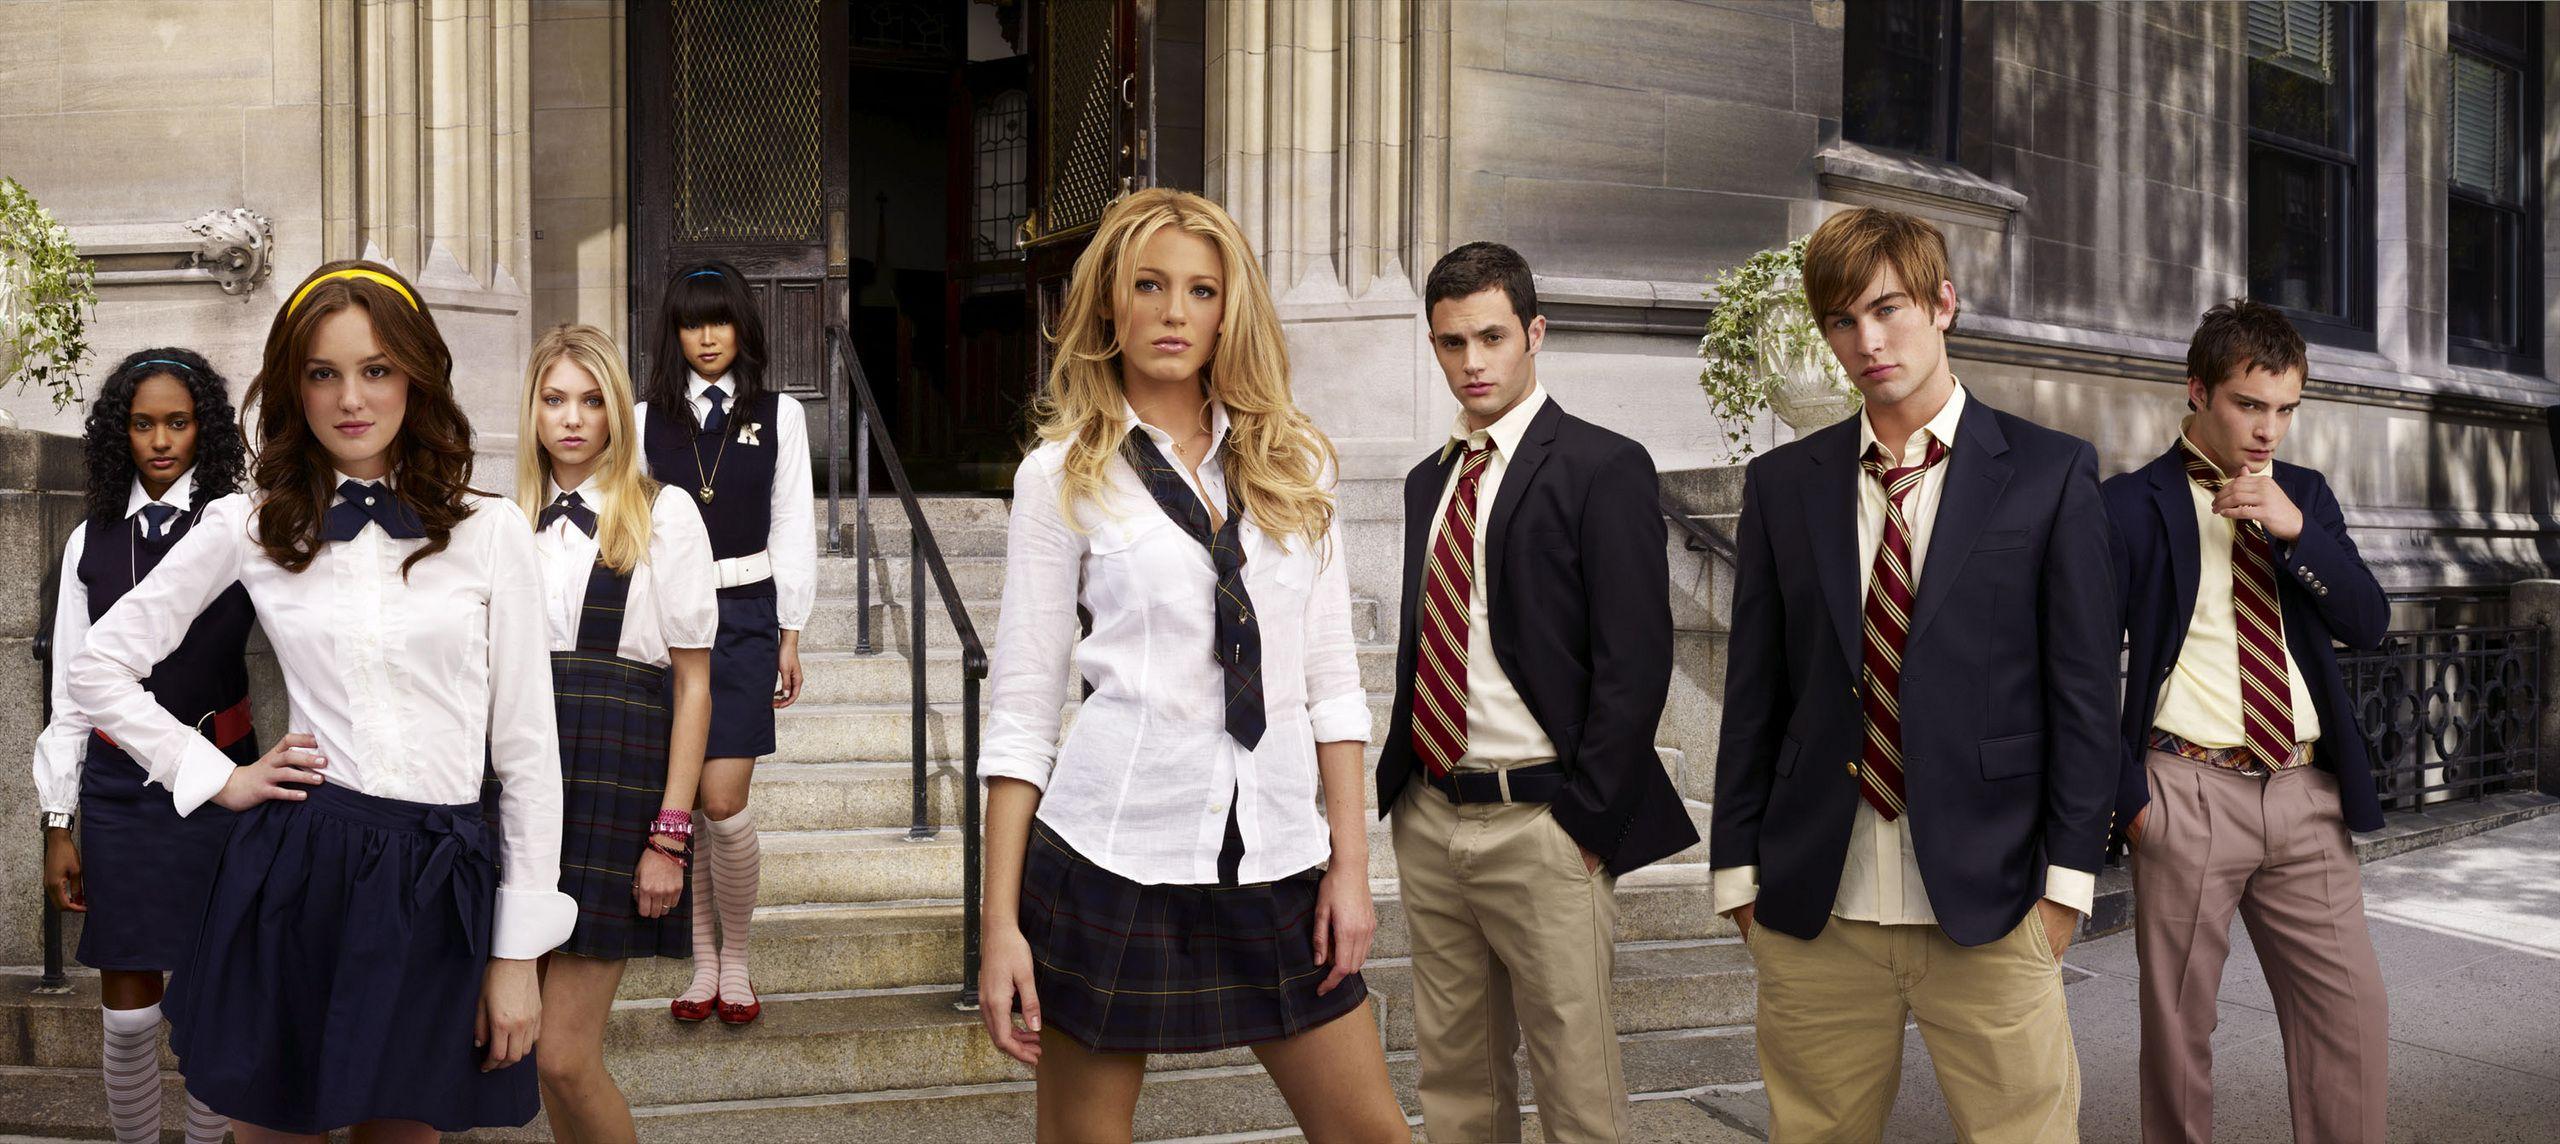 Everyone Is Saying This Show Is the Next 'Gossip Girl'